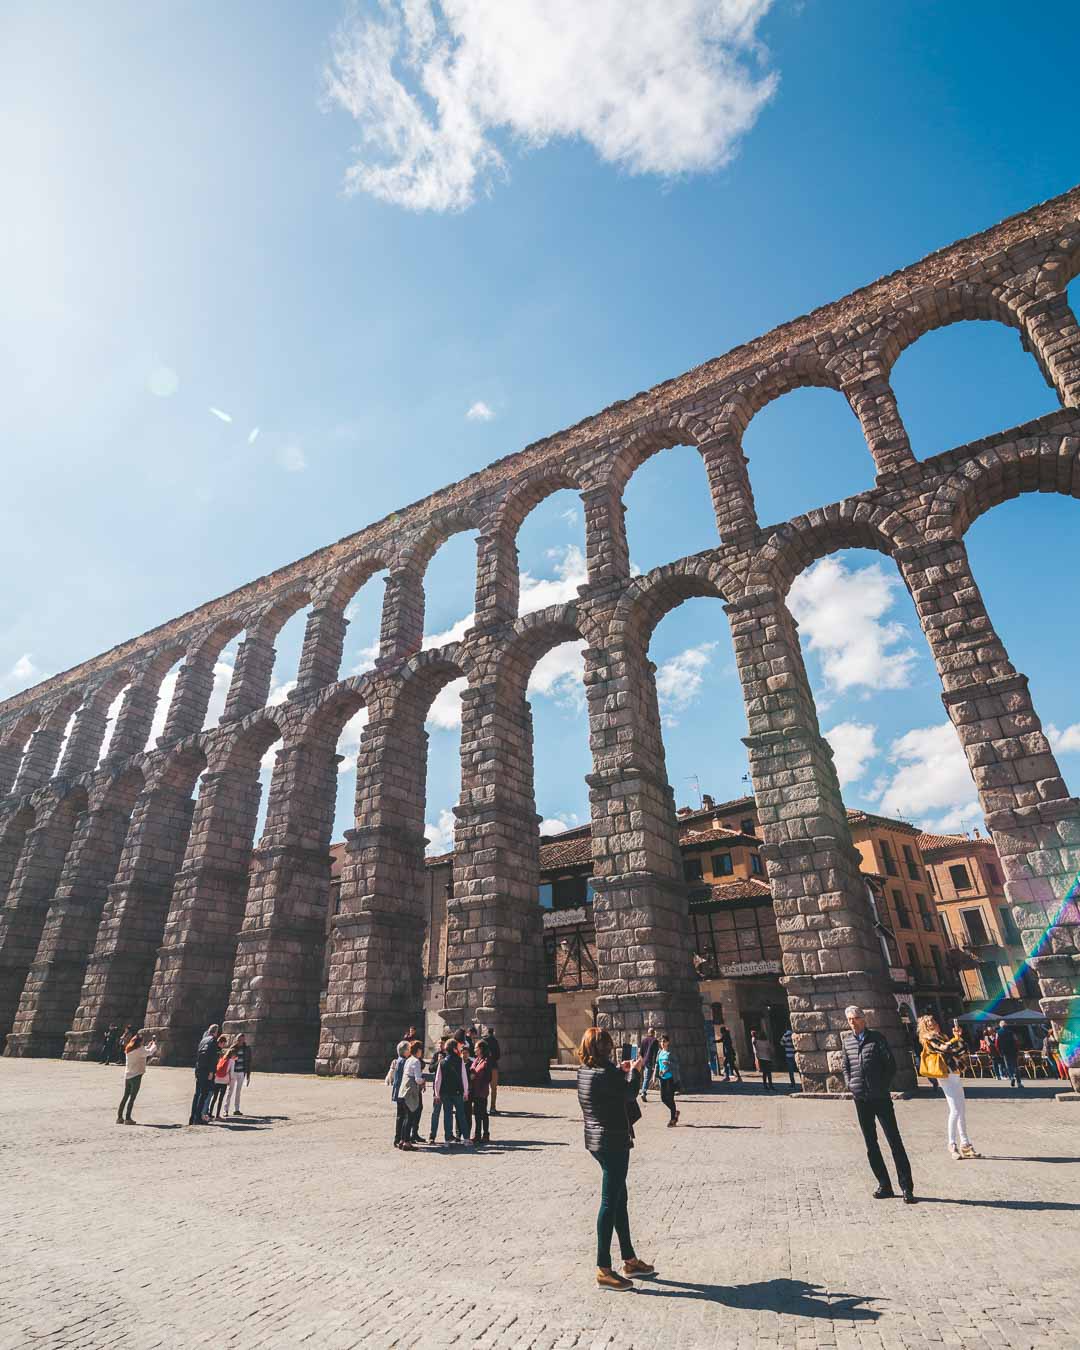 the segovia aqueduct is a famous monument in spain